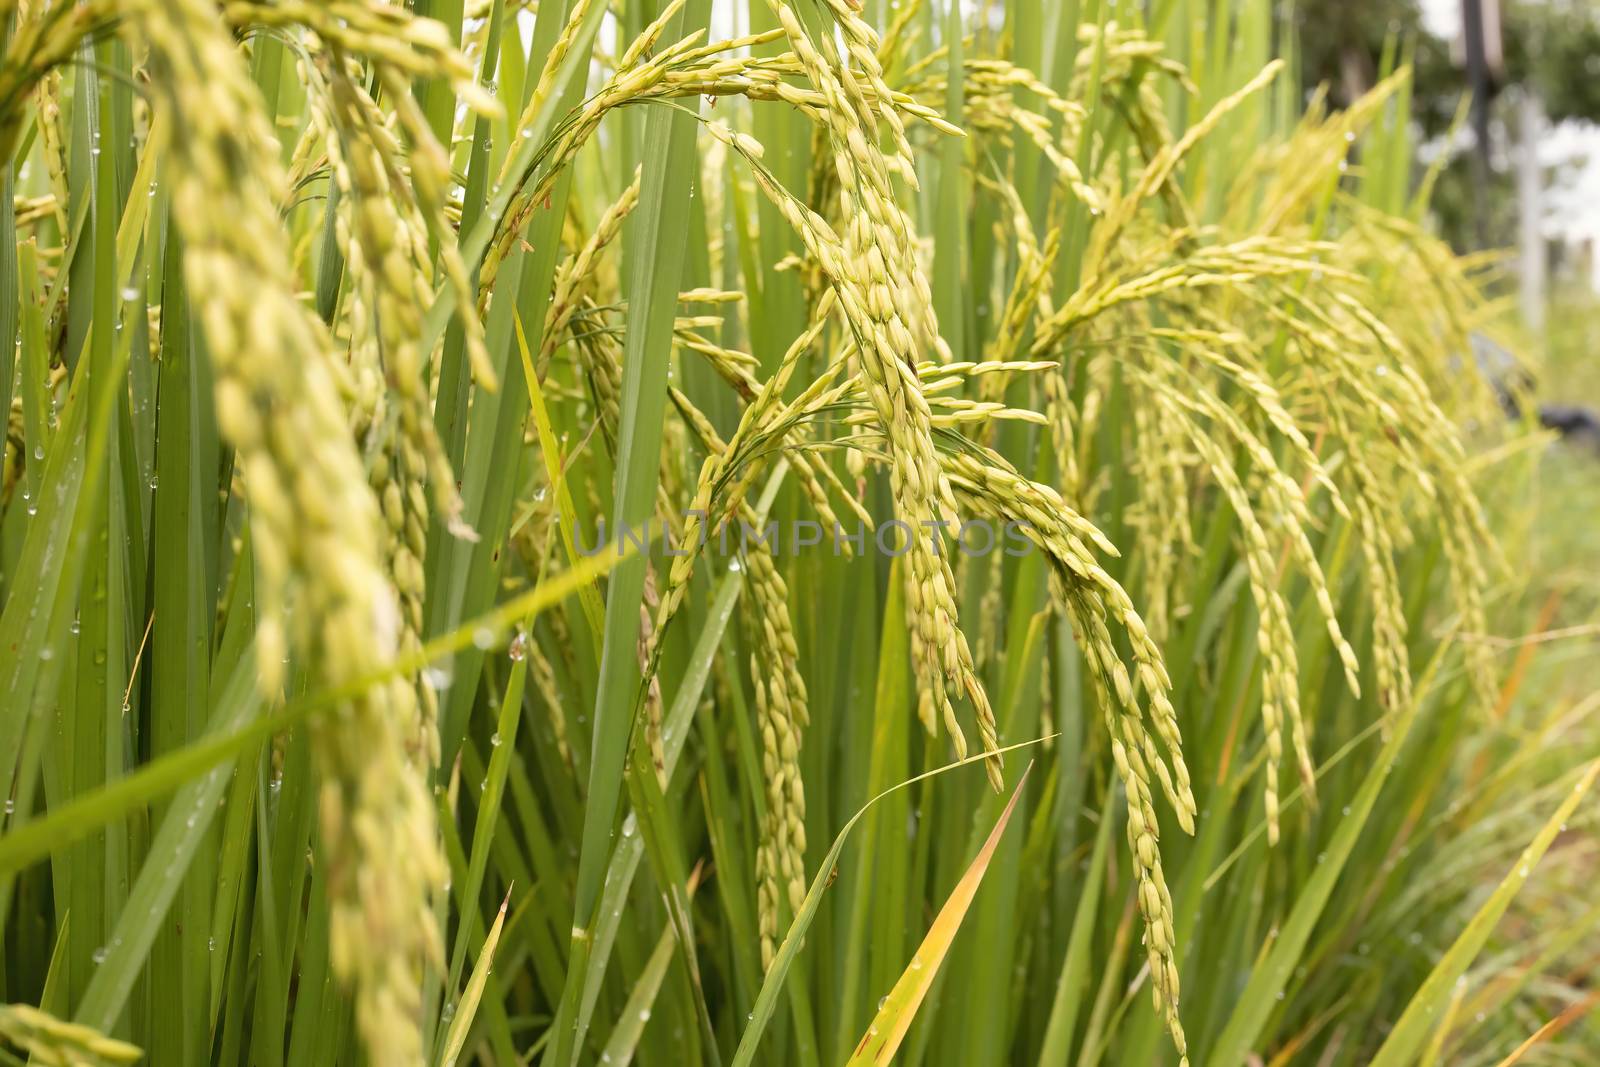 A countryside rice field containing mature plants with growing golden ears.